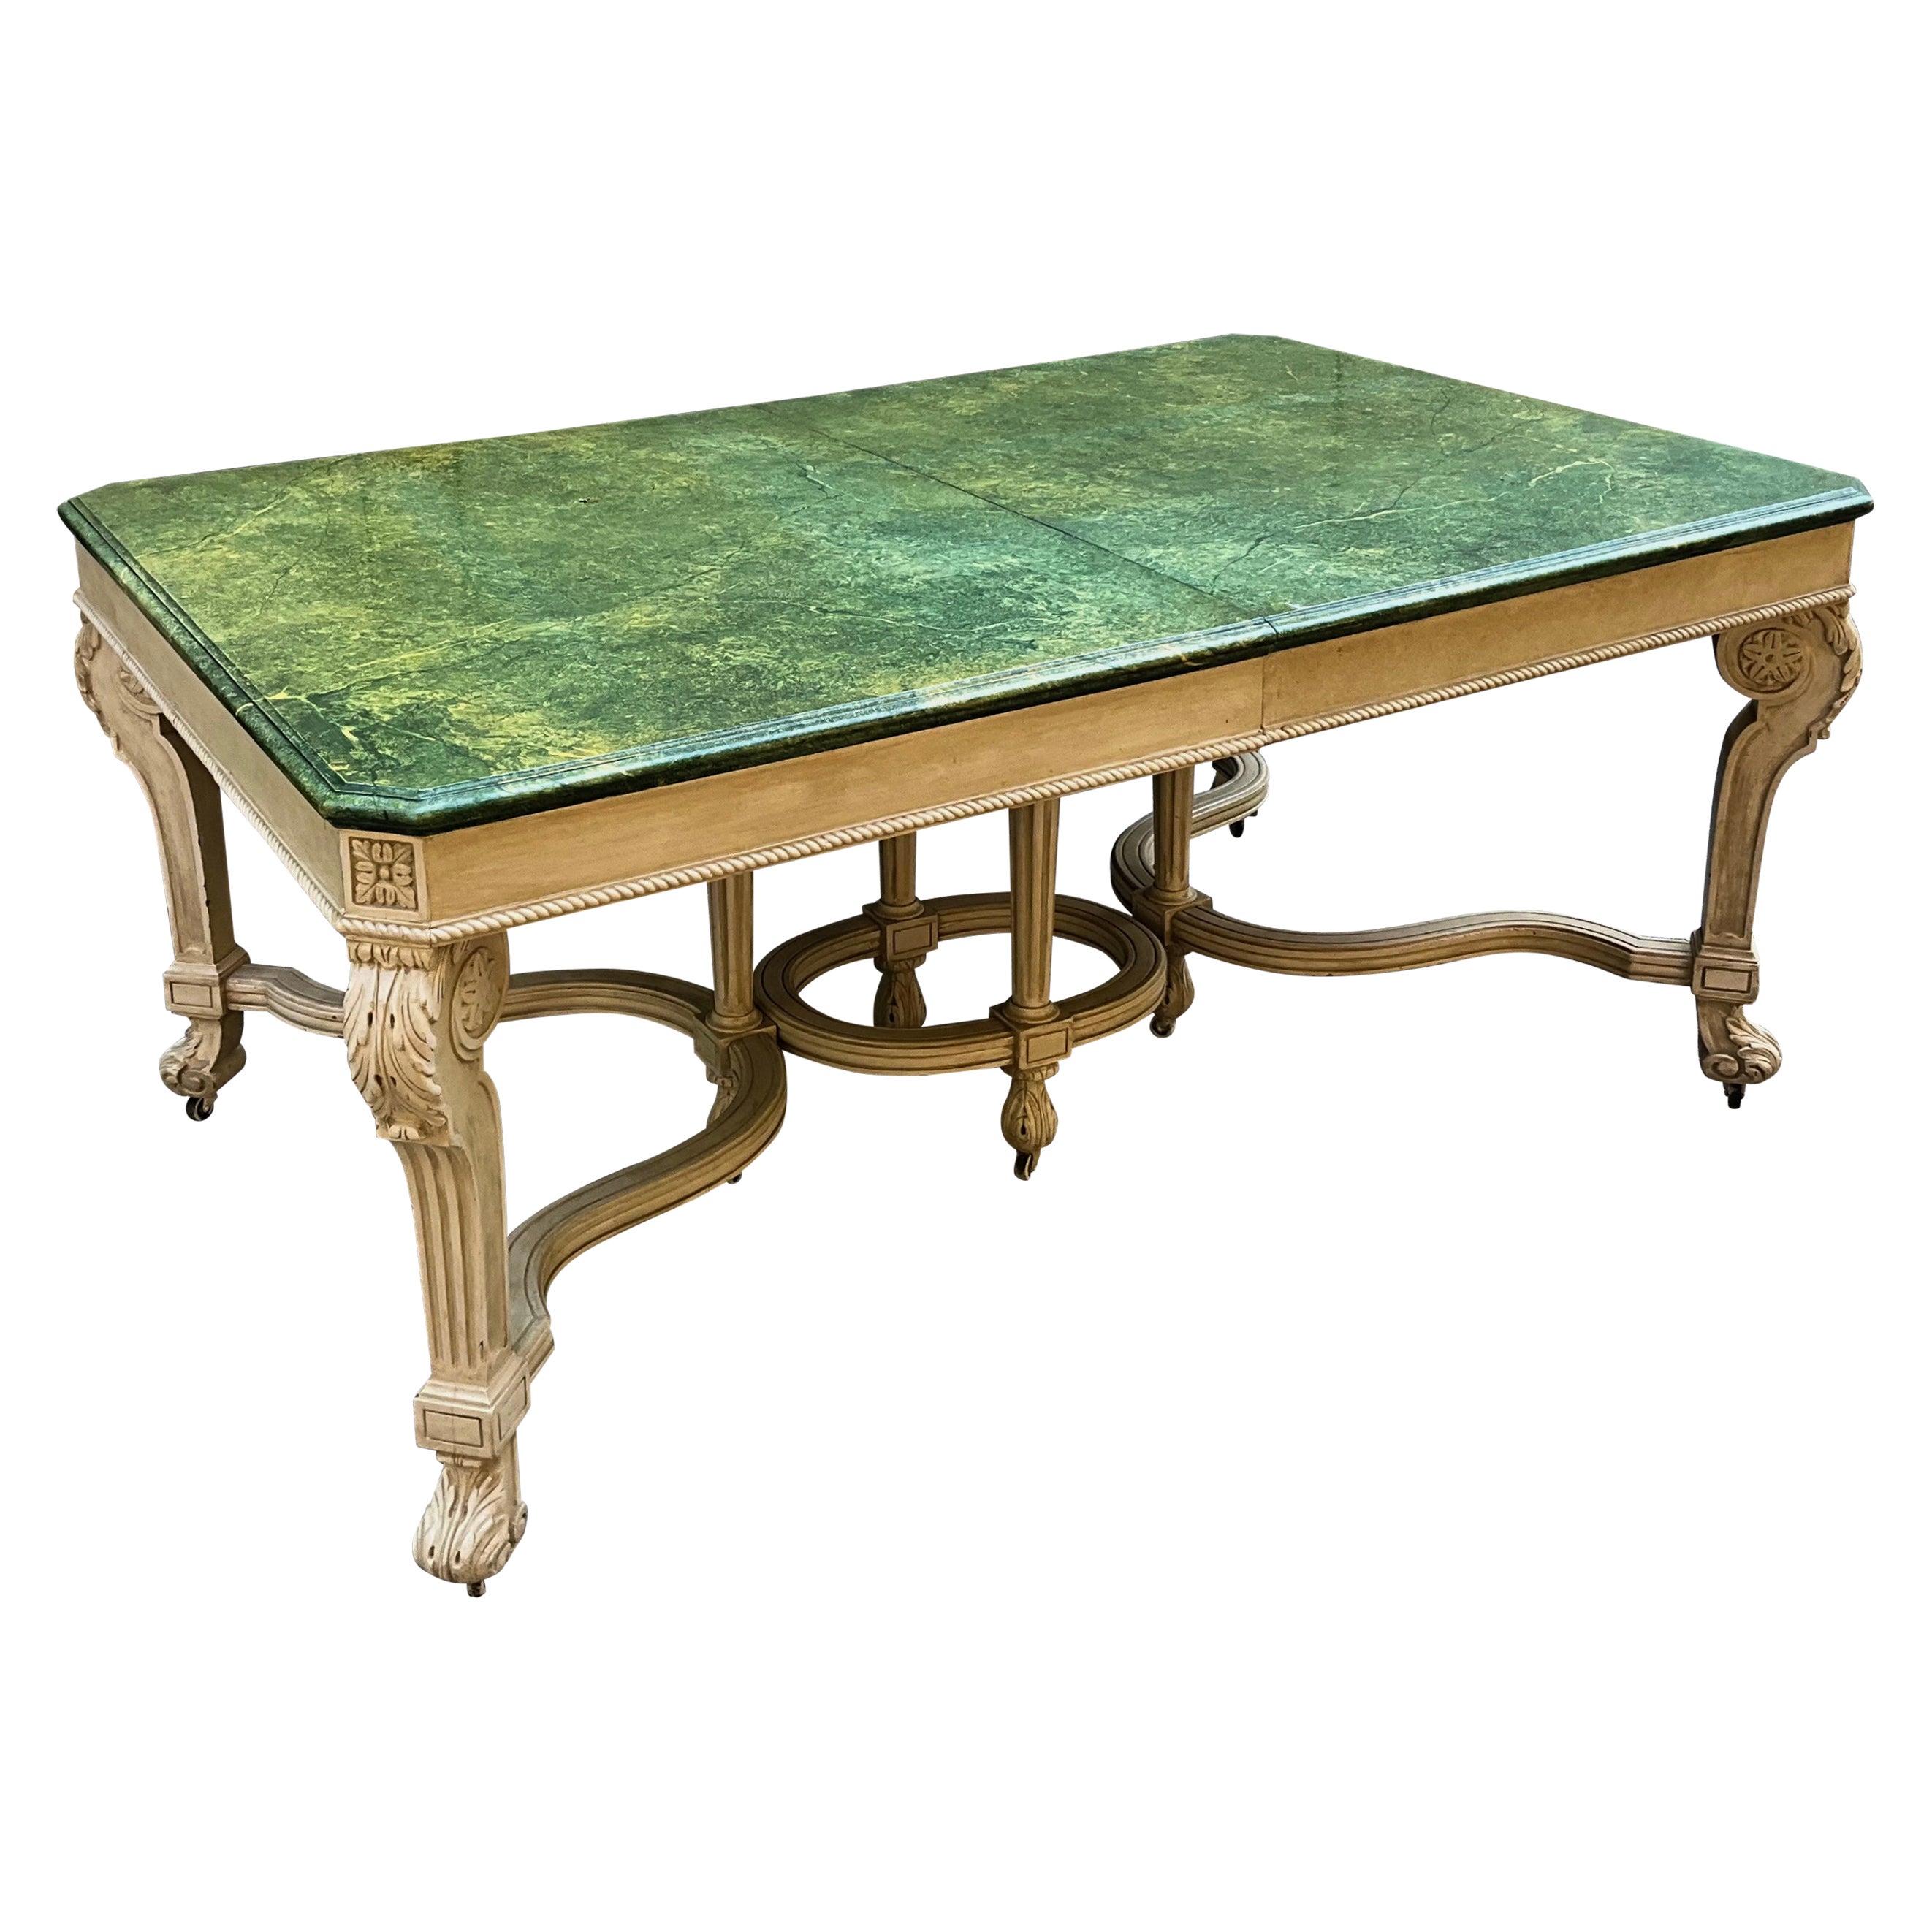 1970s Regency Style Faux Marble Painted Dining Table with 5 Leaves  For Sale